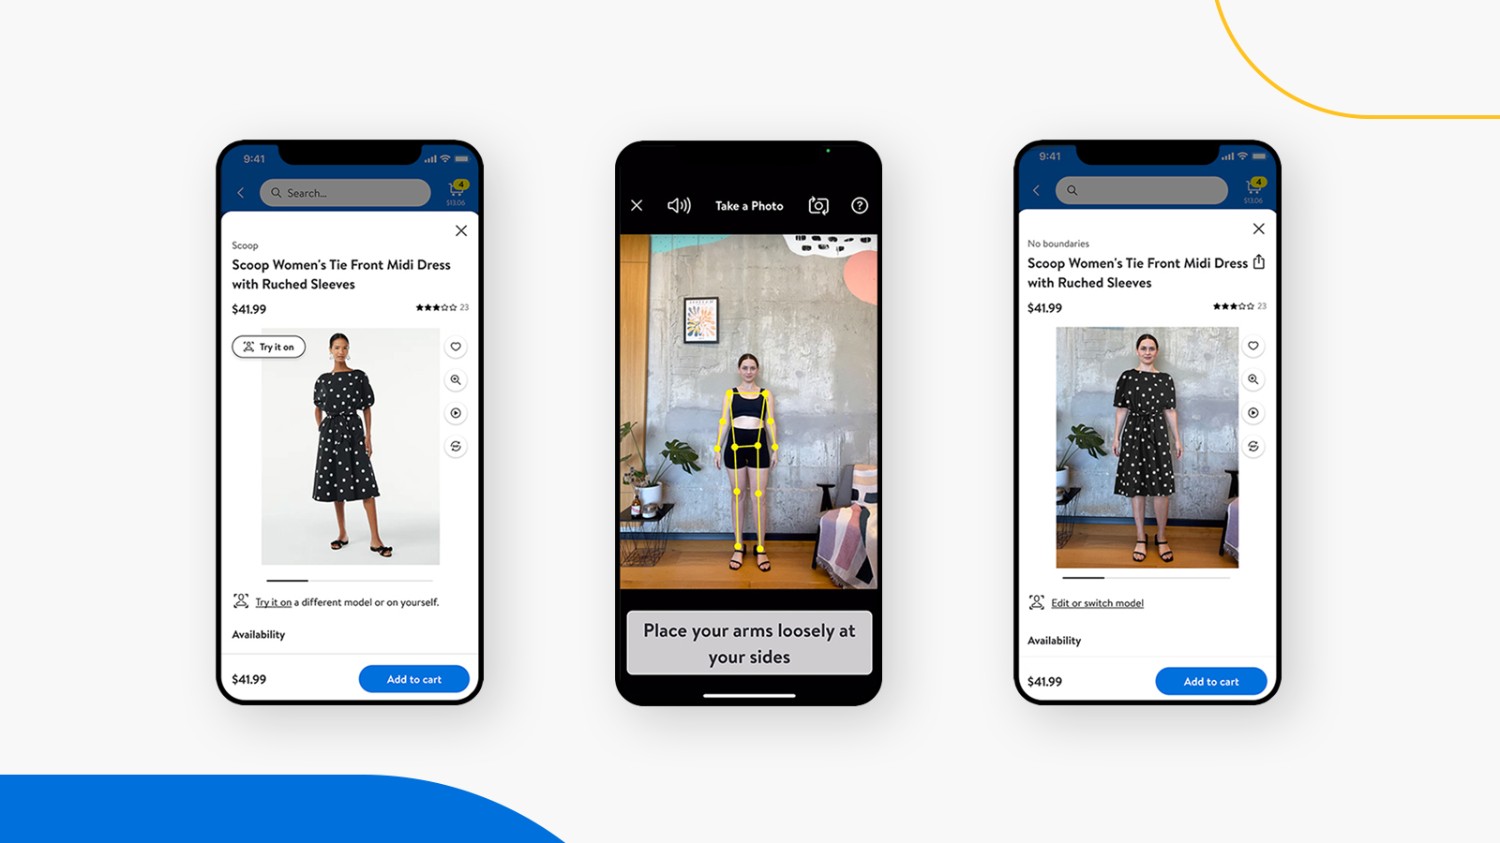 Three screenshots of the mobile app Be Your Own Model by Zeekit. First screenshot shows the dress being sold on the model with product description and price. Second screenshot is of the customer using the app to take a full length body picture of herself while the app gives guidelines for image. Third screenshot uses the customer's image with the product dress on her body along with product details and price.